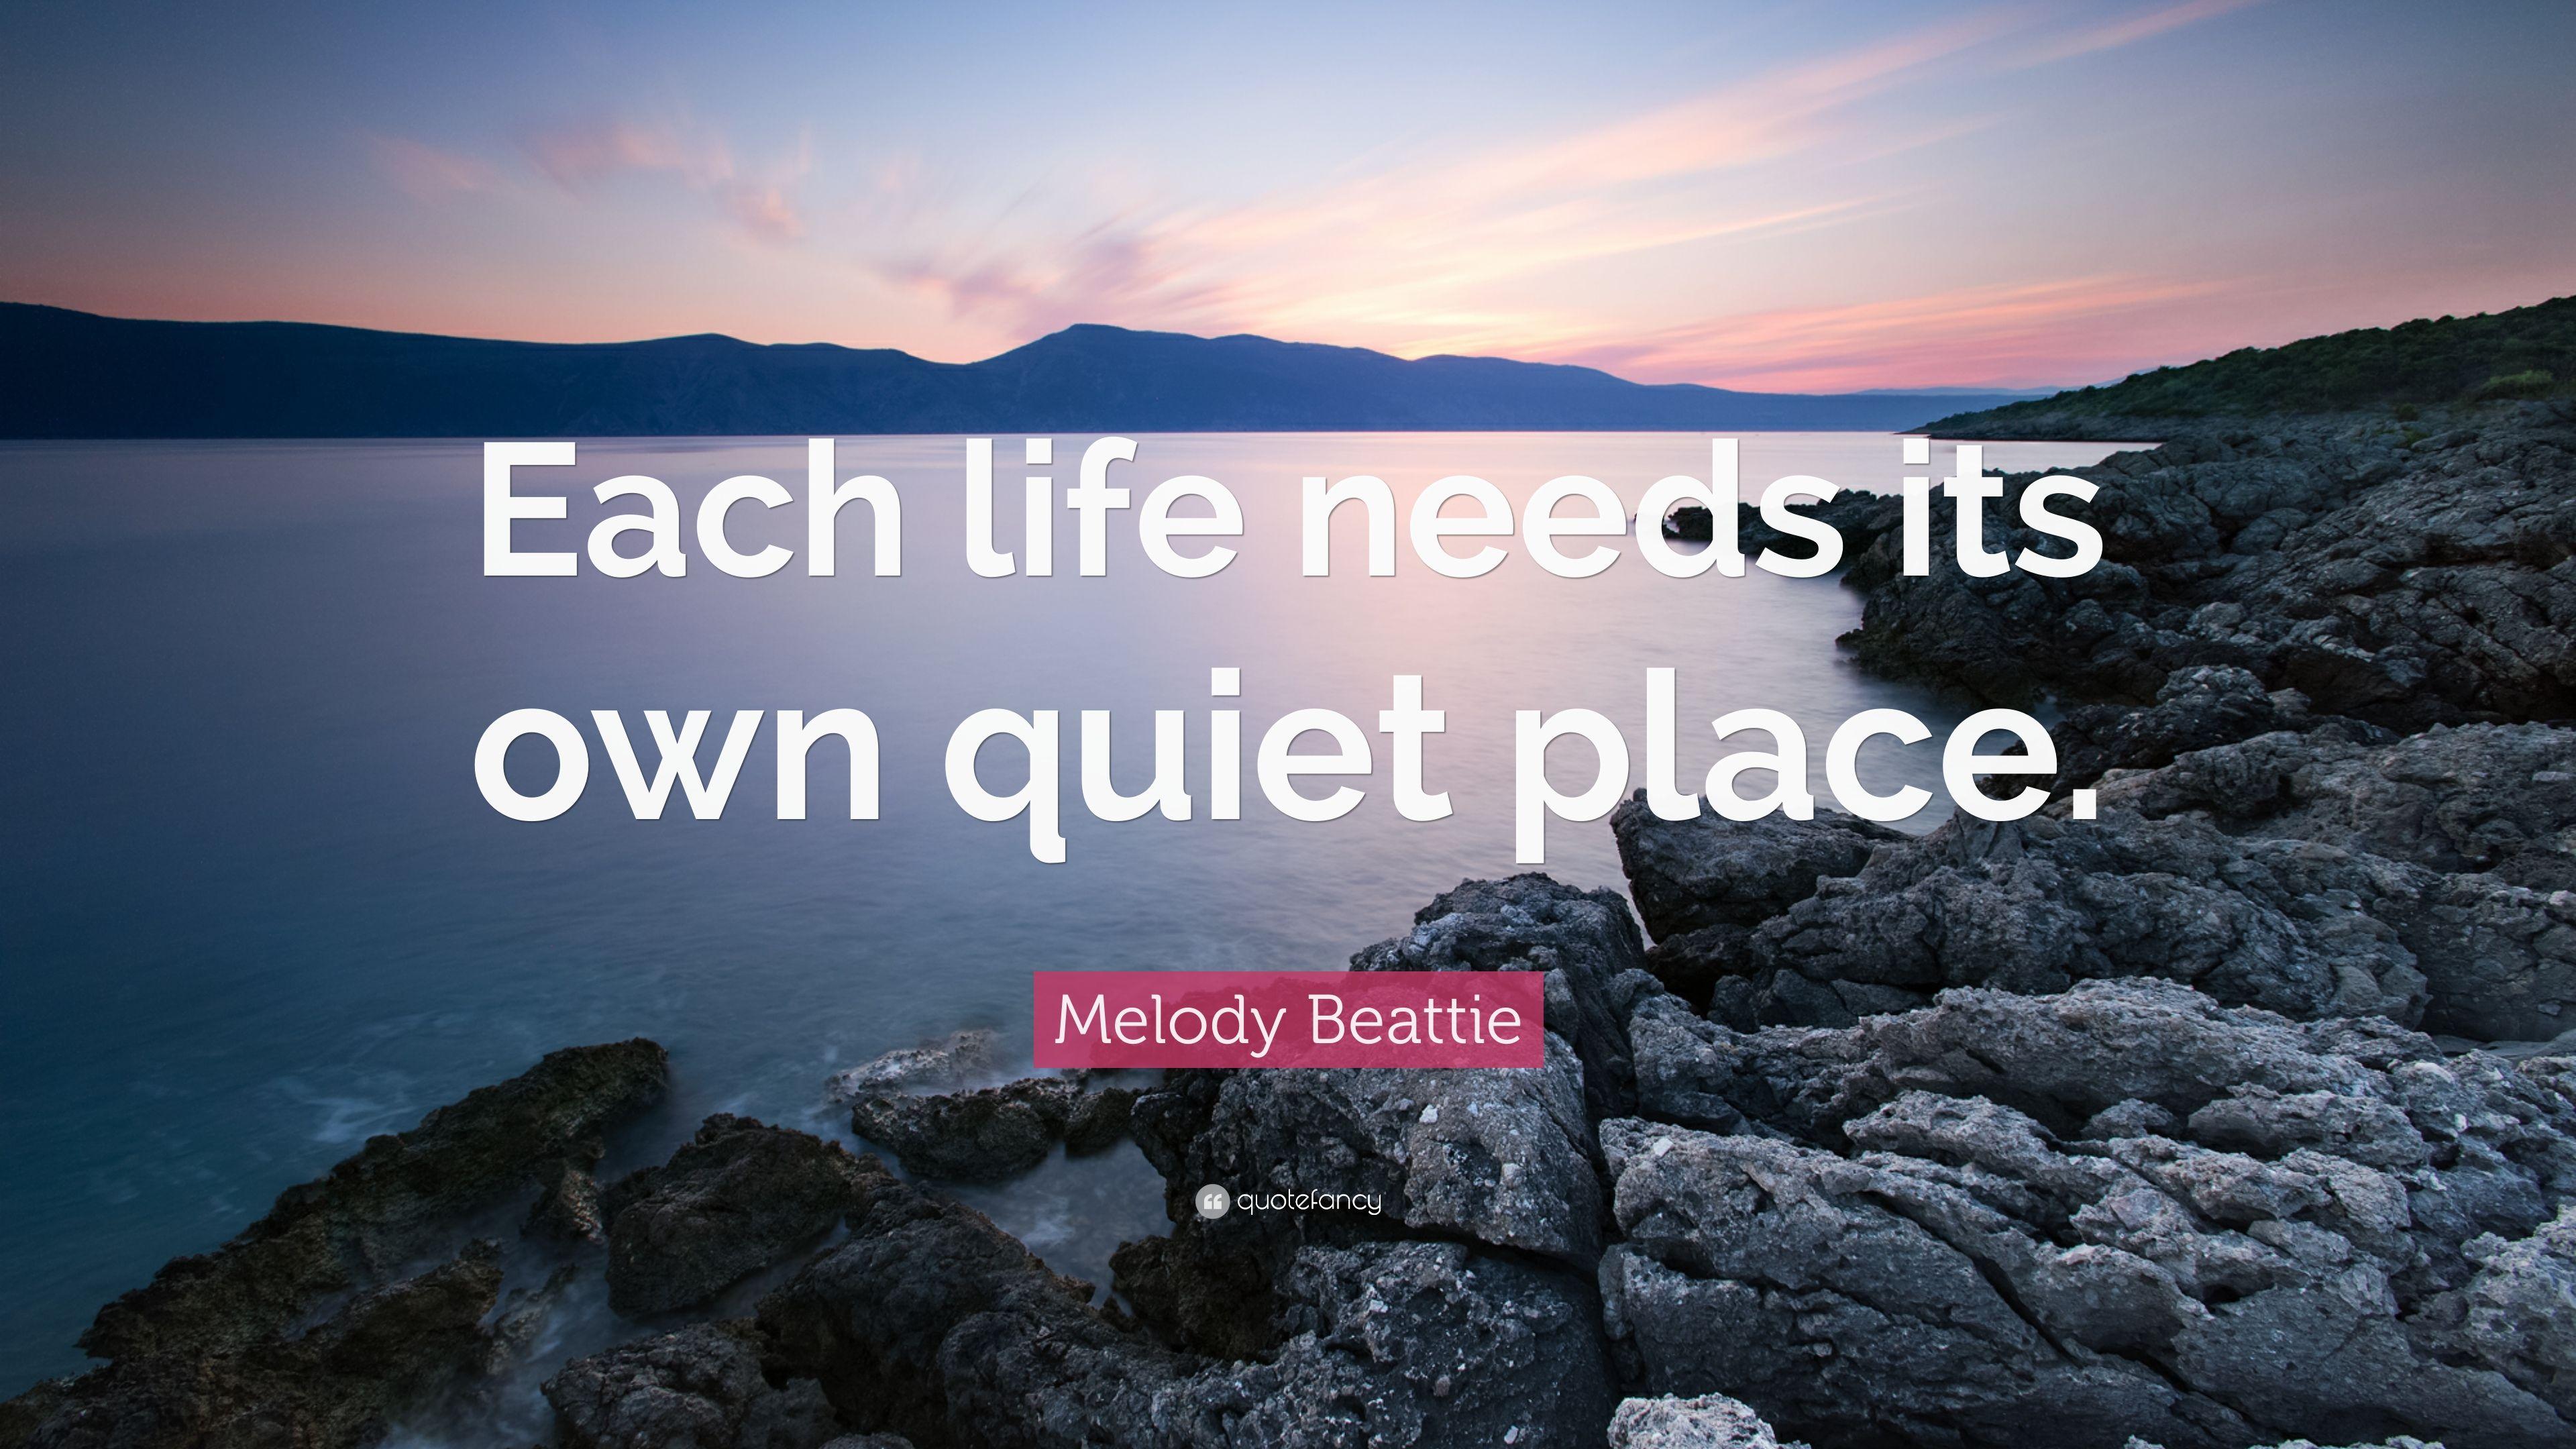 Melody Beattie Quote: “Each life needs its own quiet place.” 12